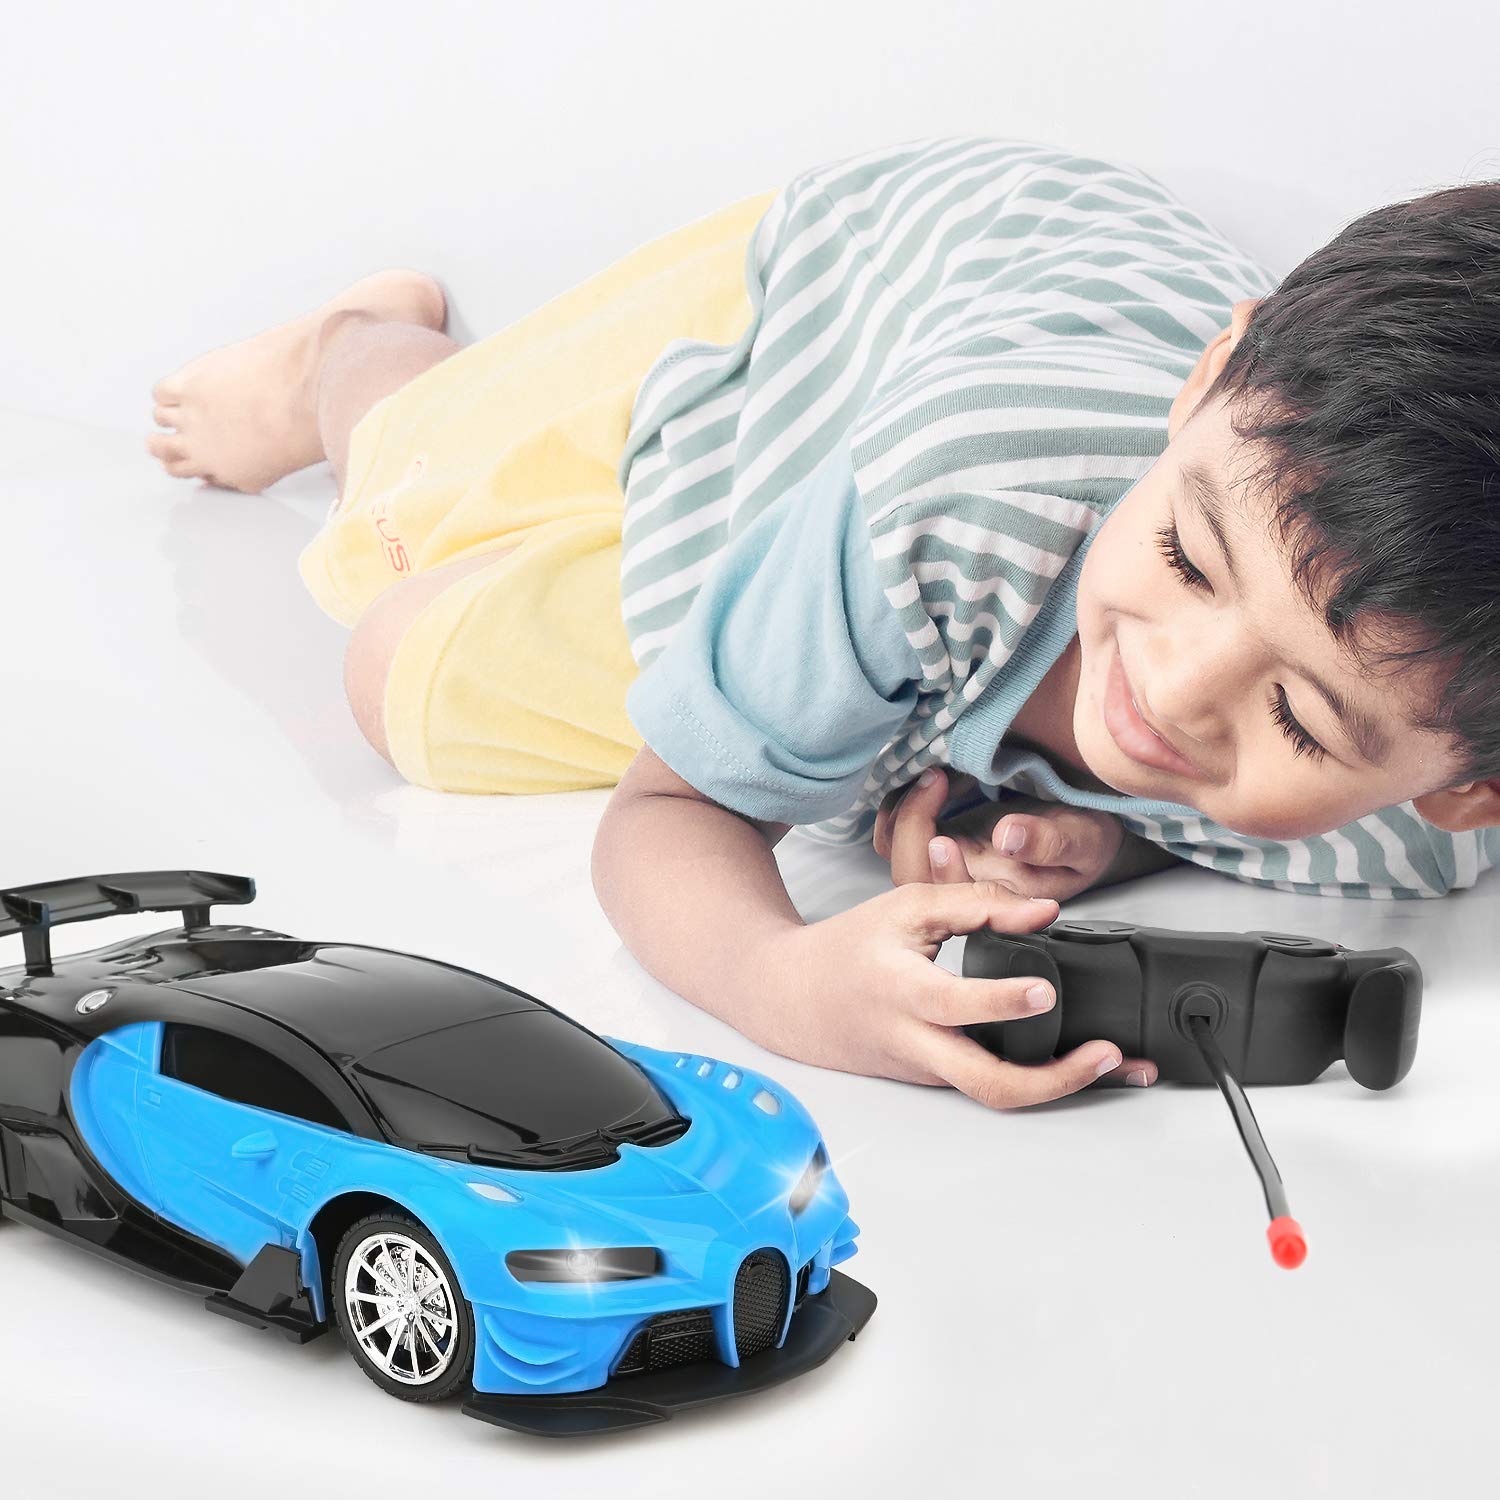 GaHoo Remote Control Car for Kids - 1/16 Scale Electric Remote Toy Racing, with Led Lights Rechargeable High-Speed Hobby Toy Vehicle, RC Car Gifts for Age 3 4 5 6 7 8 9 Year Old Boys Girls (Blue)